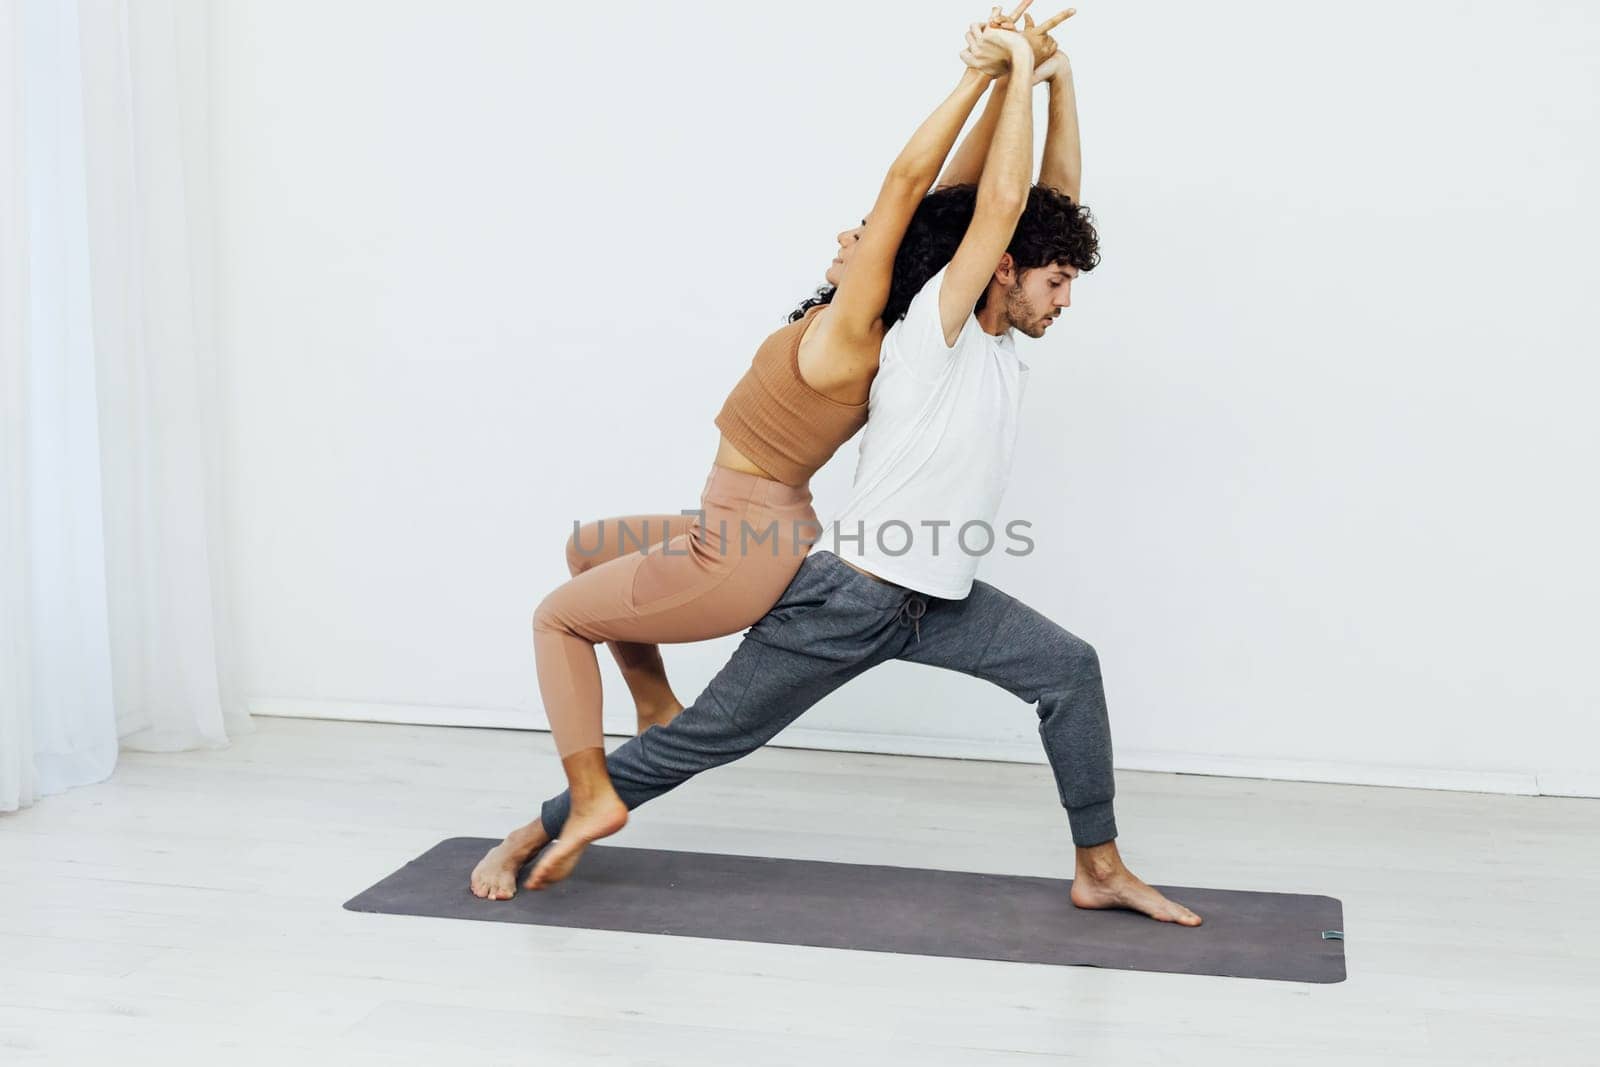 coach stretches a woman's back with yoga in the gym by Simakov